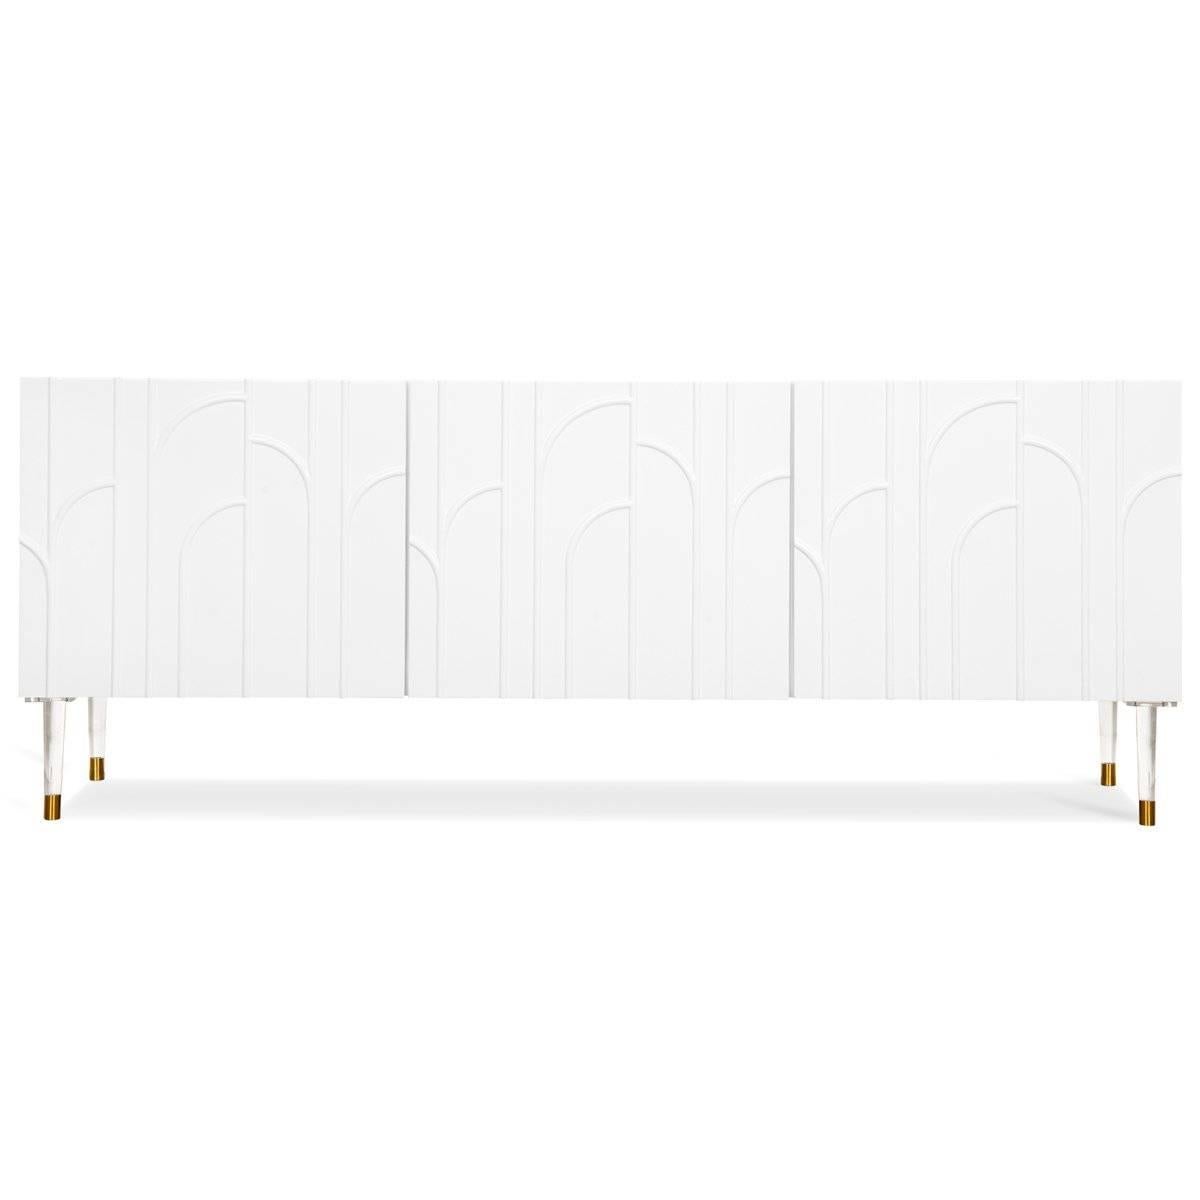 Introducing the Provence three-door credenza. This beautiful credenza features a matte white body with a striking Art Deco-inspired facade and tapered Lucite and brass legs. Inside the credenza, you will find adjustable-height shelving and plenty of